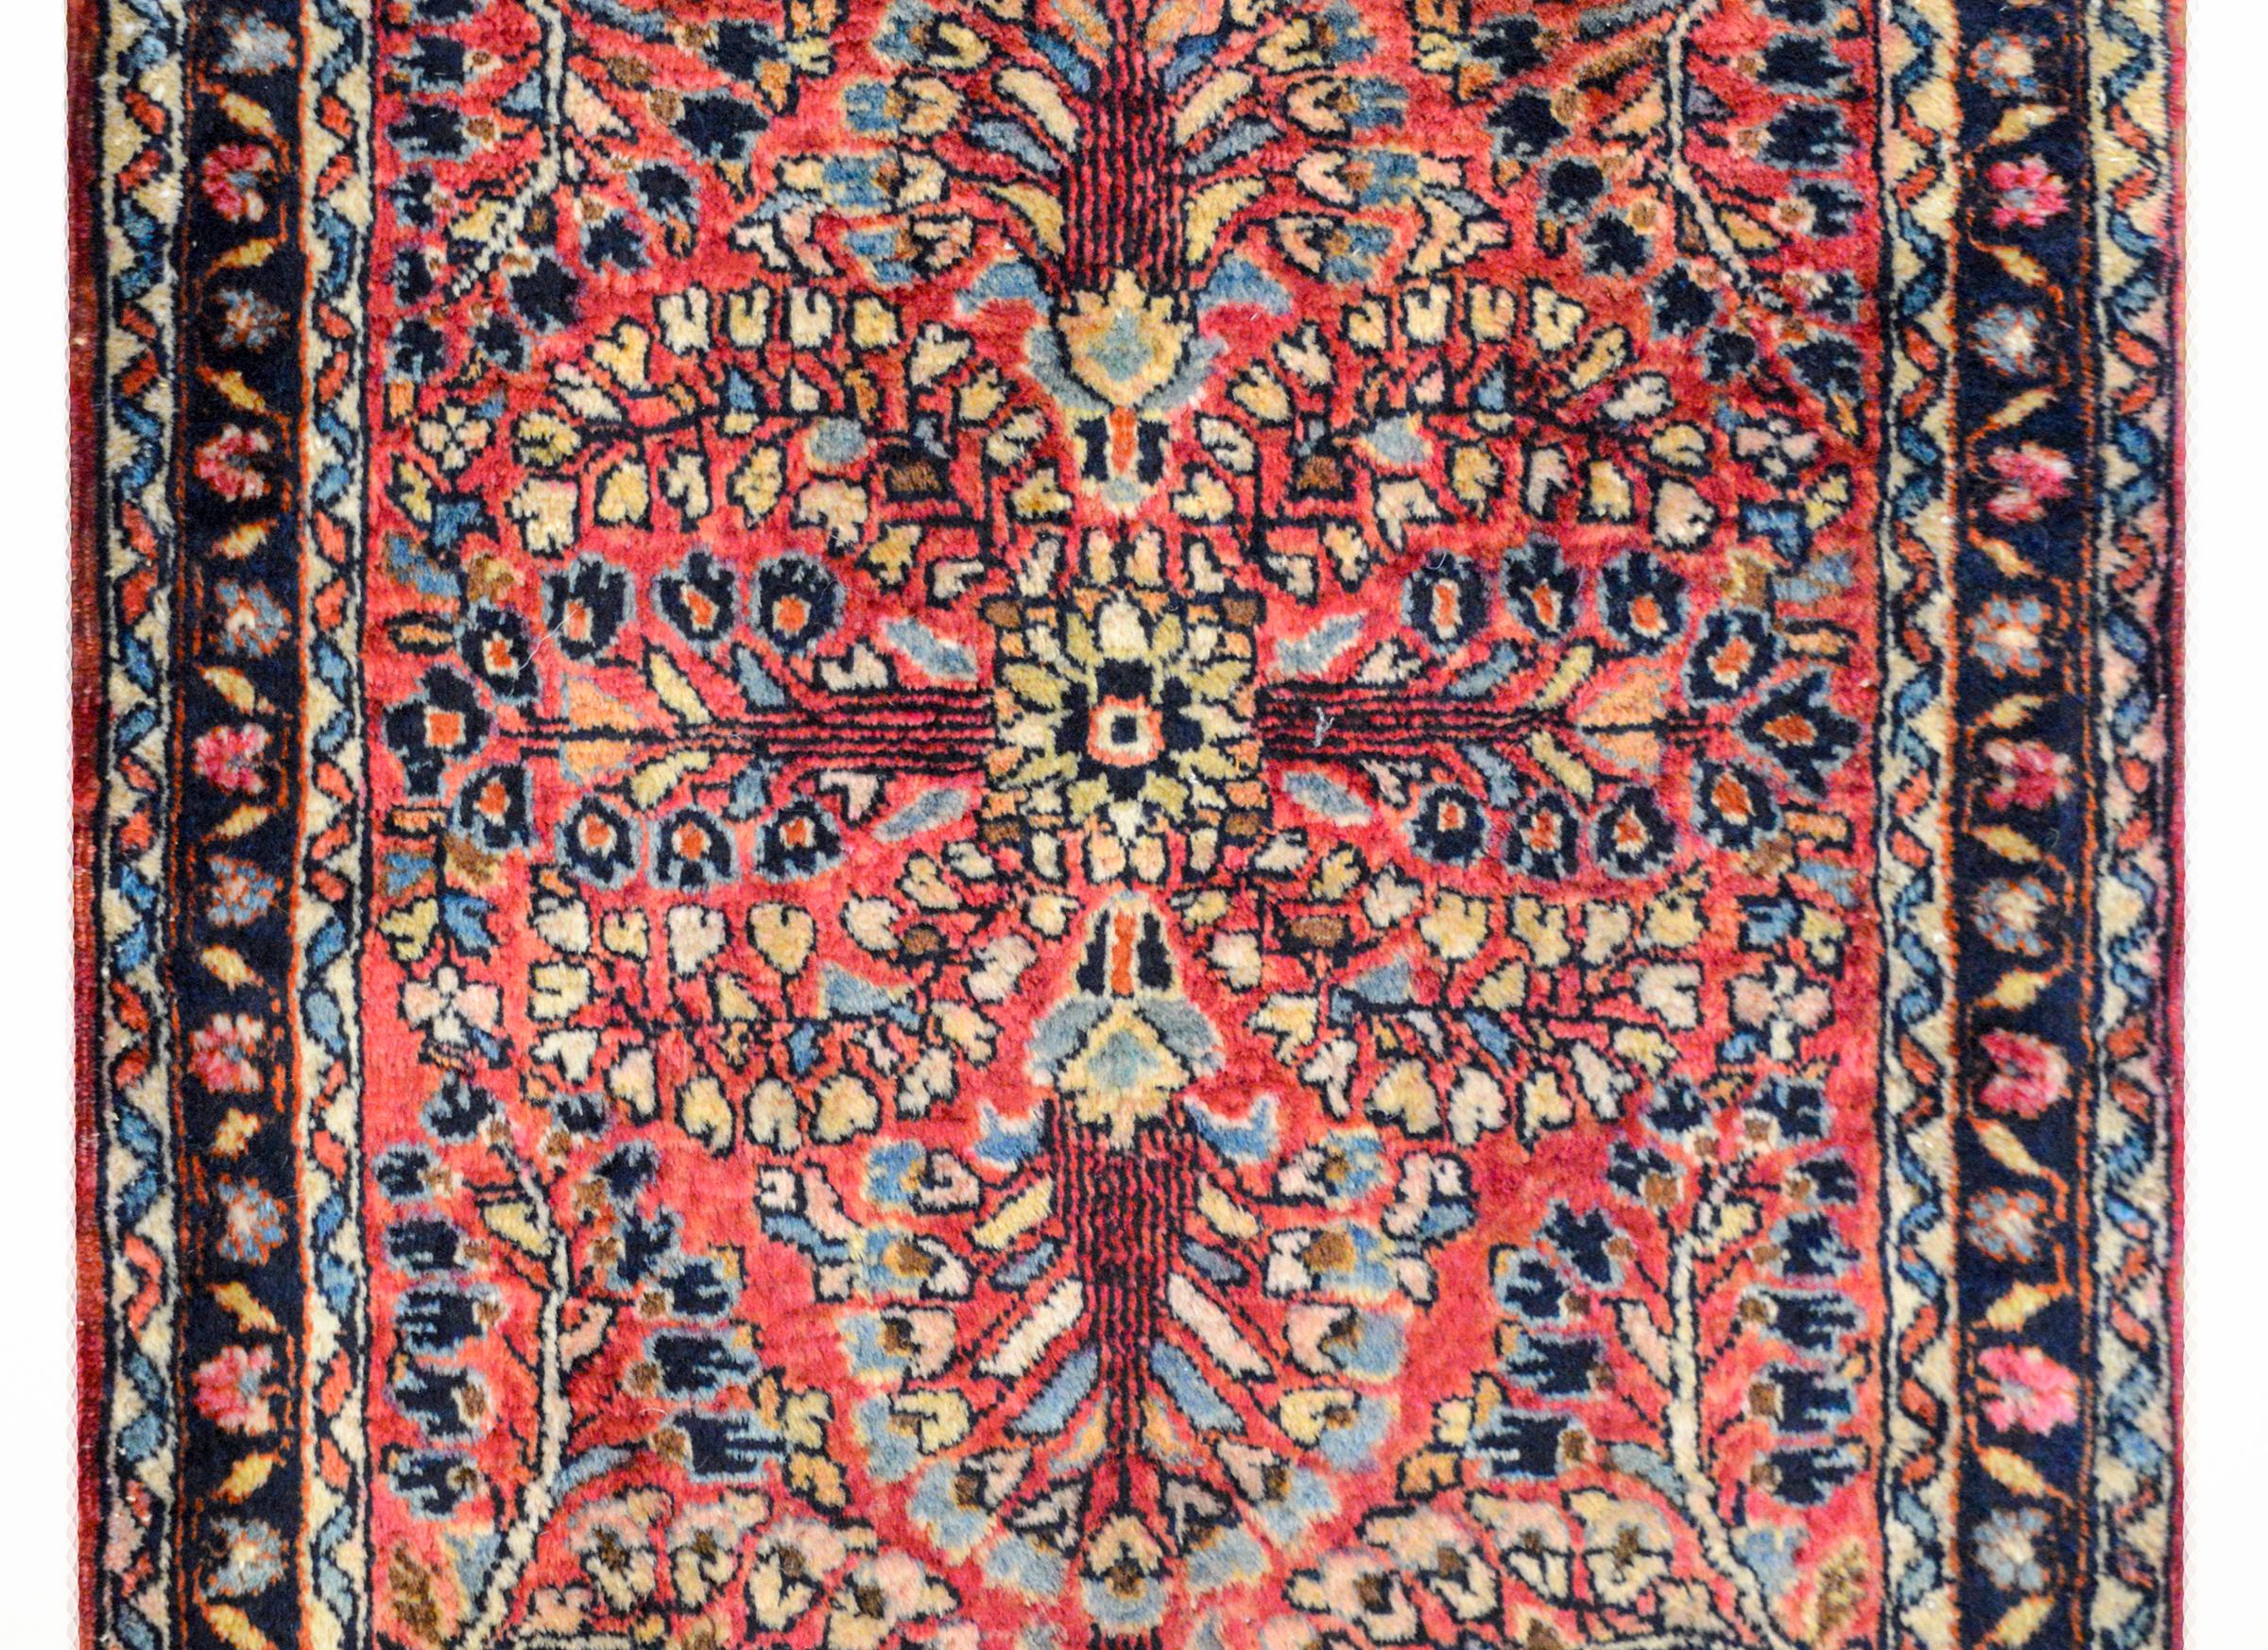 A wonderful early 20th century petite Persian Sarouk rug with a large-scale mirrored floral pattern woven in light and dark indigo, cream, pink, and black wool, against a light cranberry colored ground. The border is sweet with a petite floral